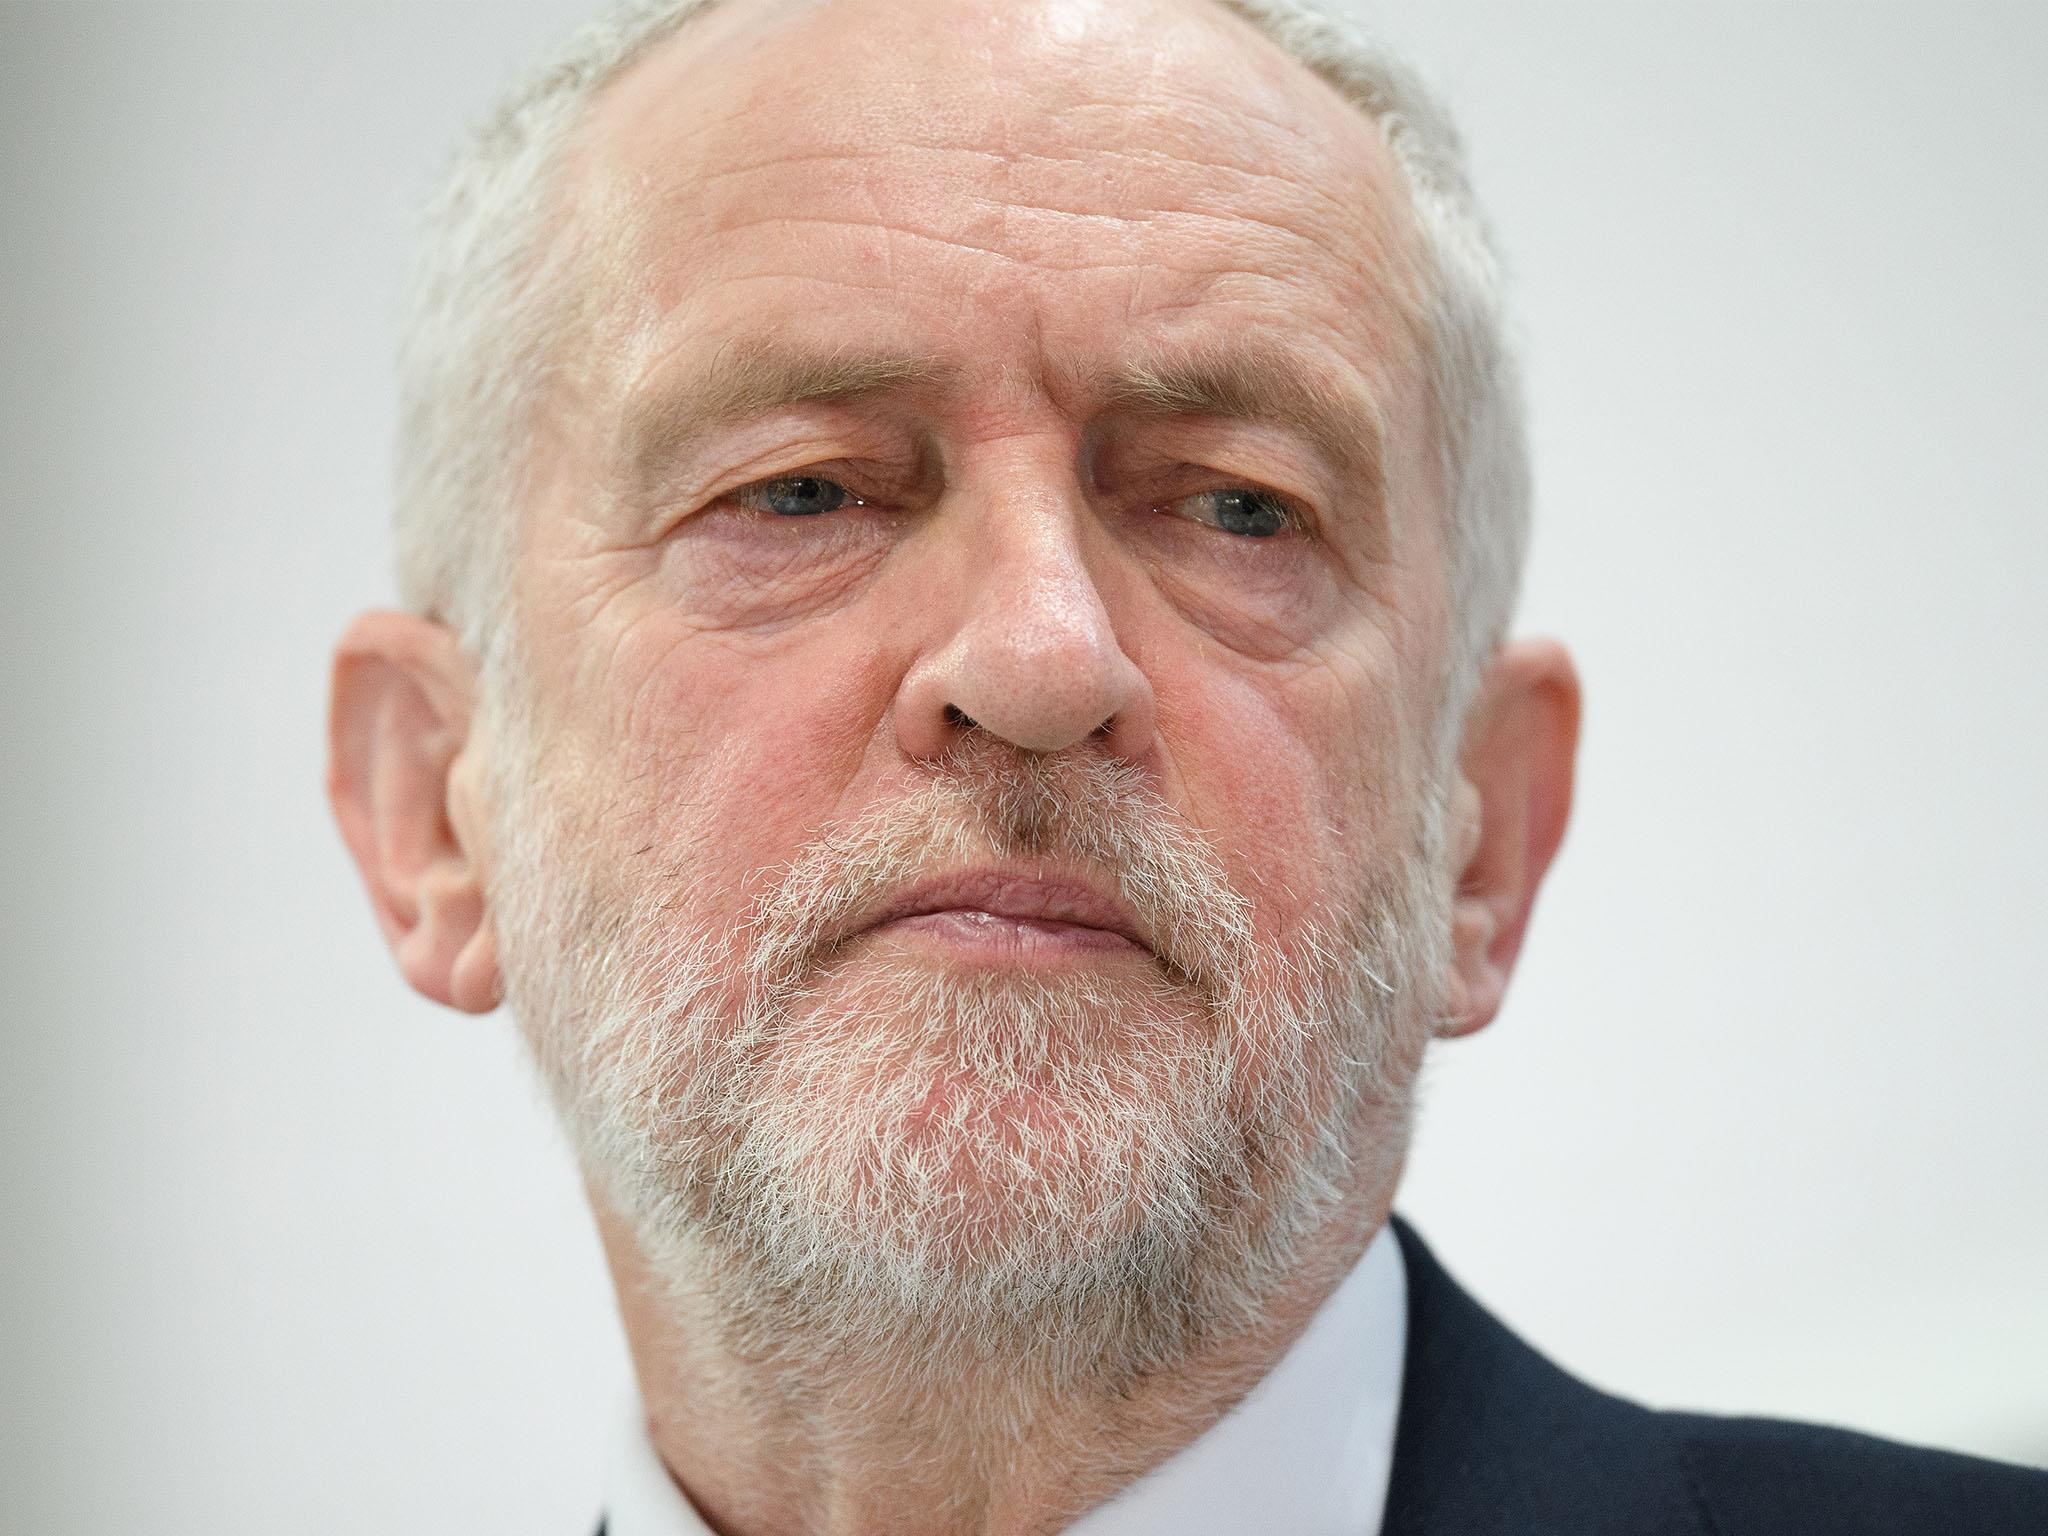 Jeremy Corbyn said he was 'sincerely sorry' for the pain caused to the Jewish community